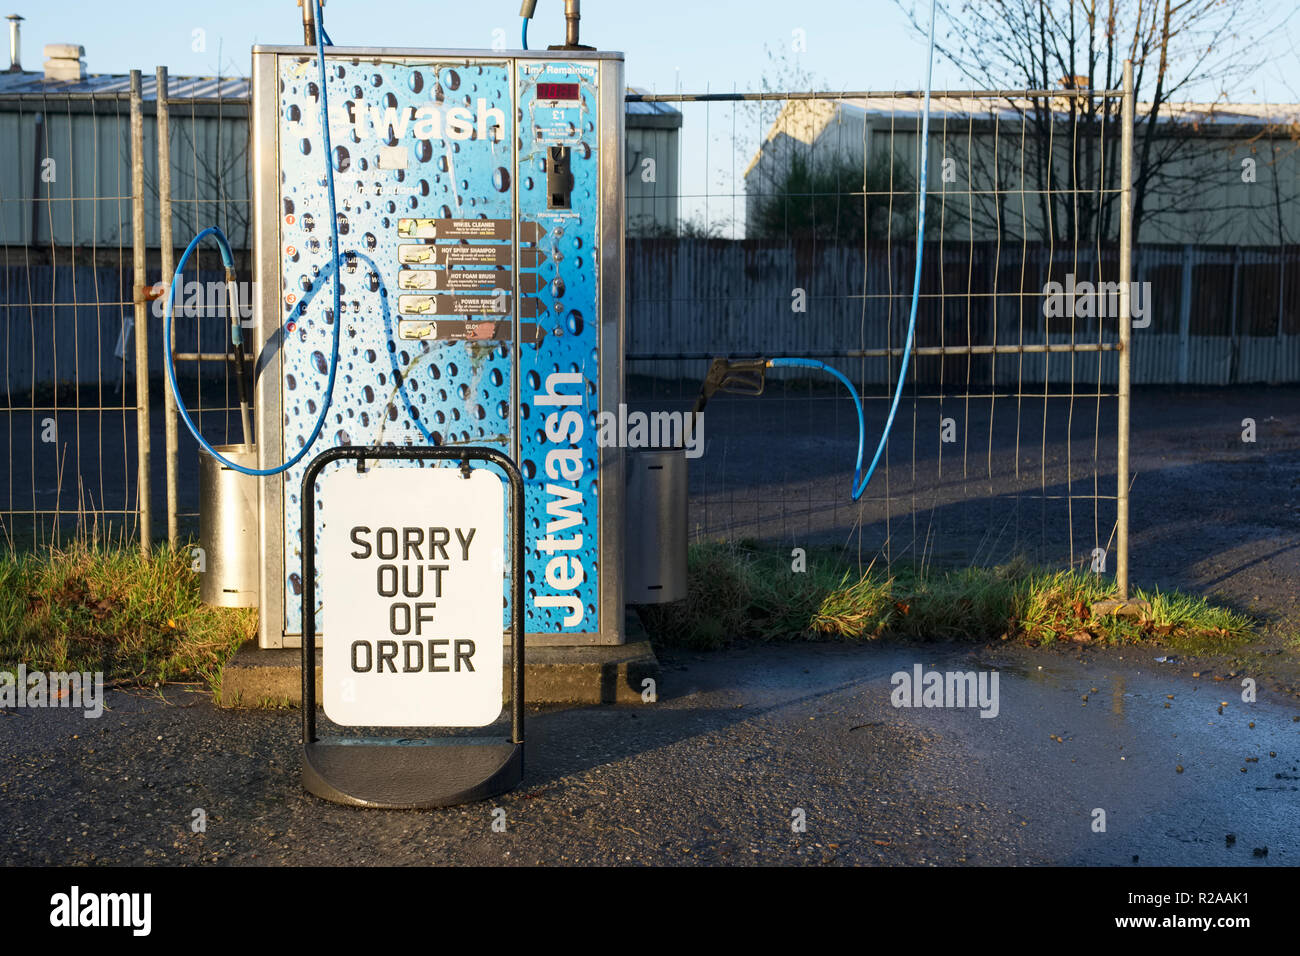 London / England - November 16th 2018: Sorry out of order sign at petrol station jet wash Stock Photo